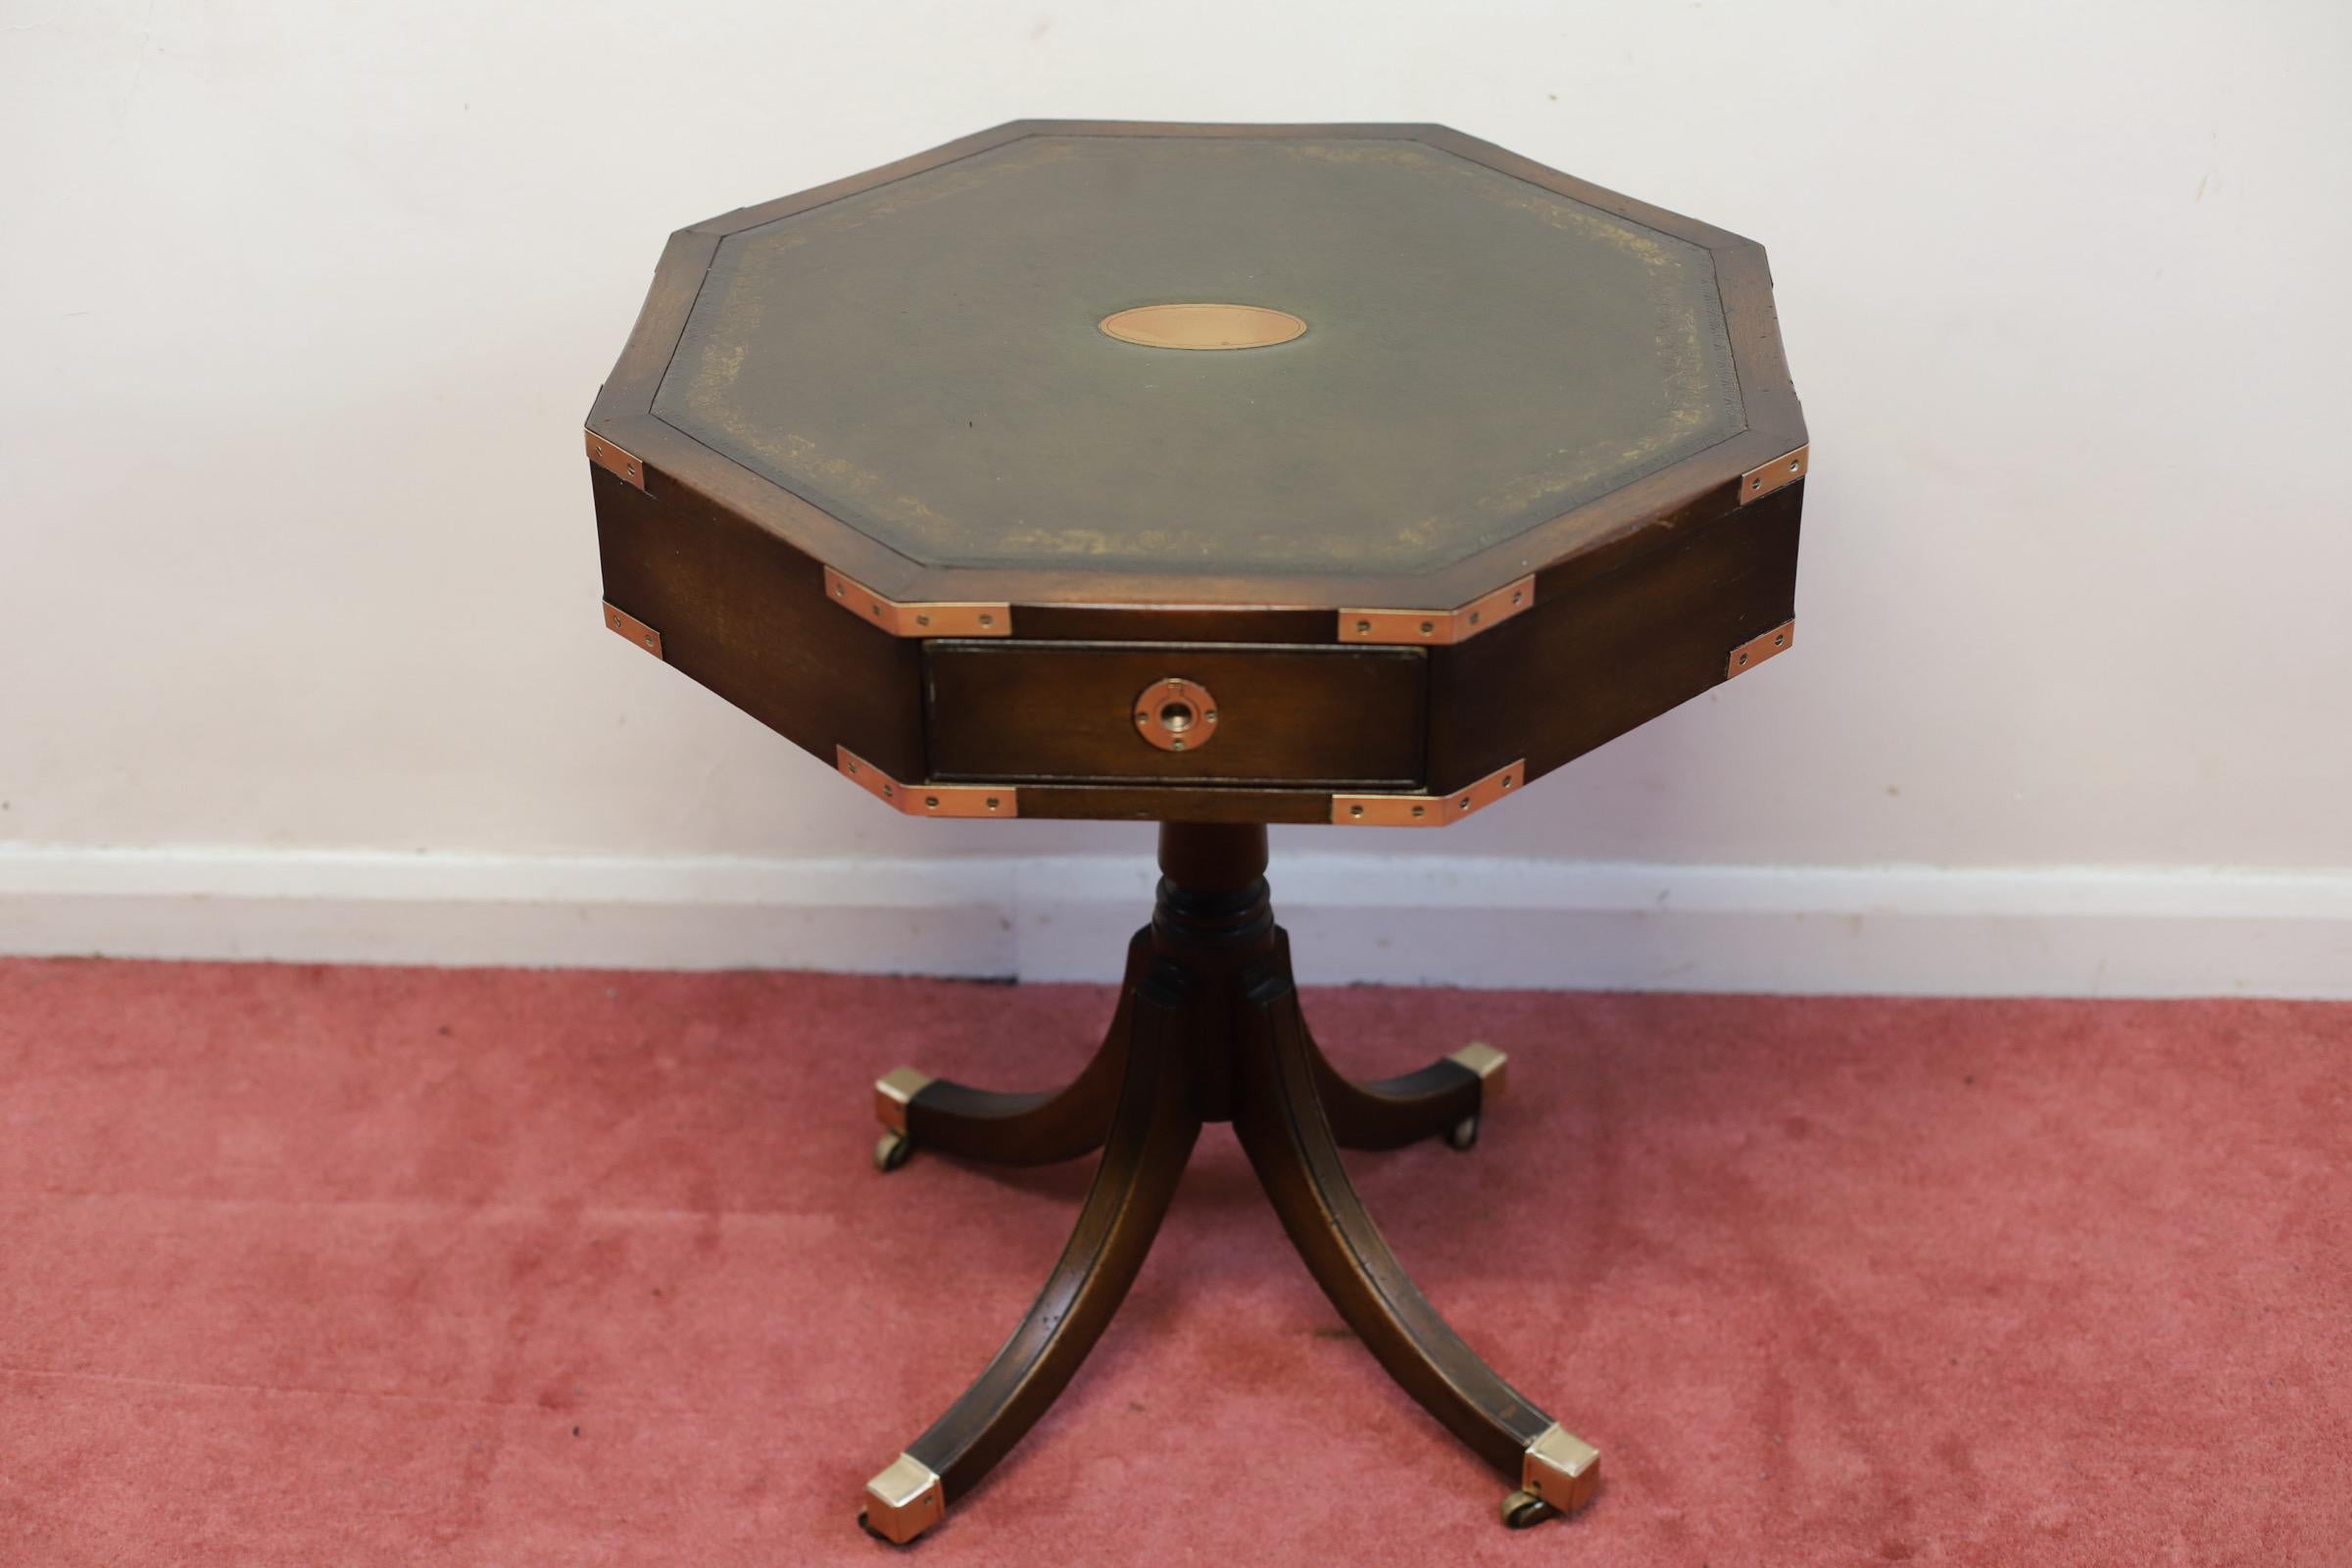 
We delight to offer for sale this lovely Campaign style drum table made by Bevan Funnell , with insert leather top , the handles are all original and the top is on a revolving base , in good condition .
Don't hesitate to contact me if you have any